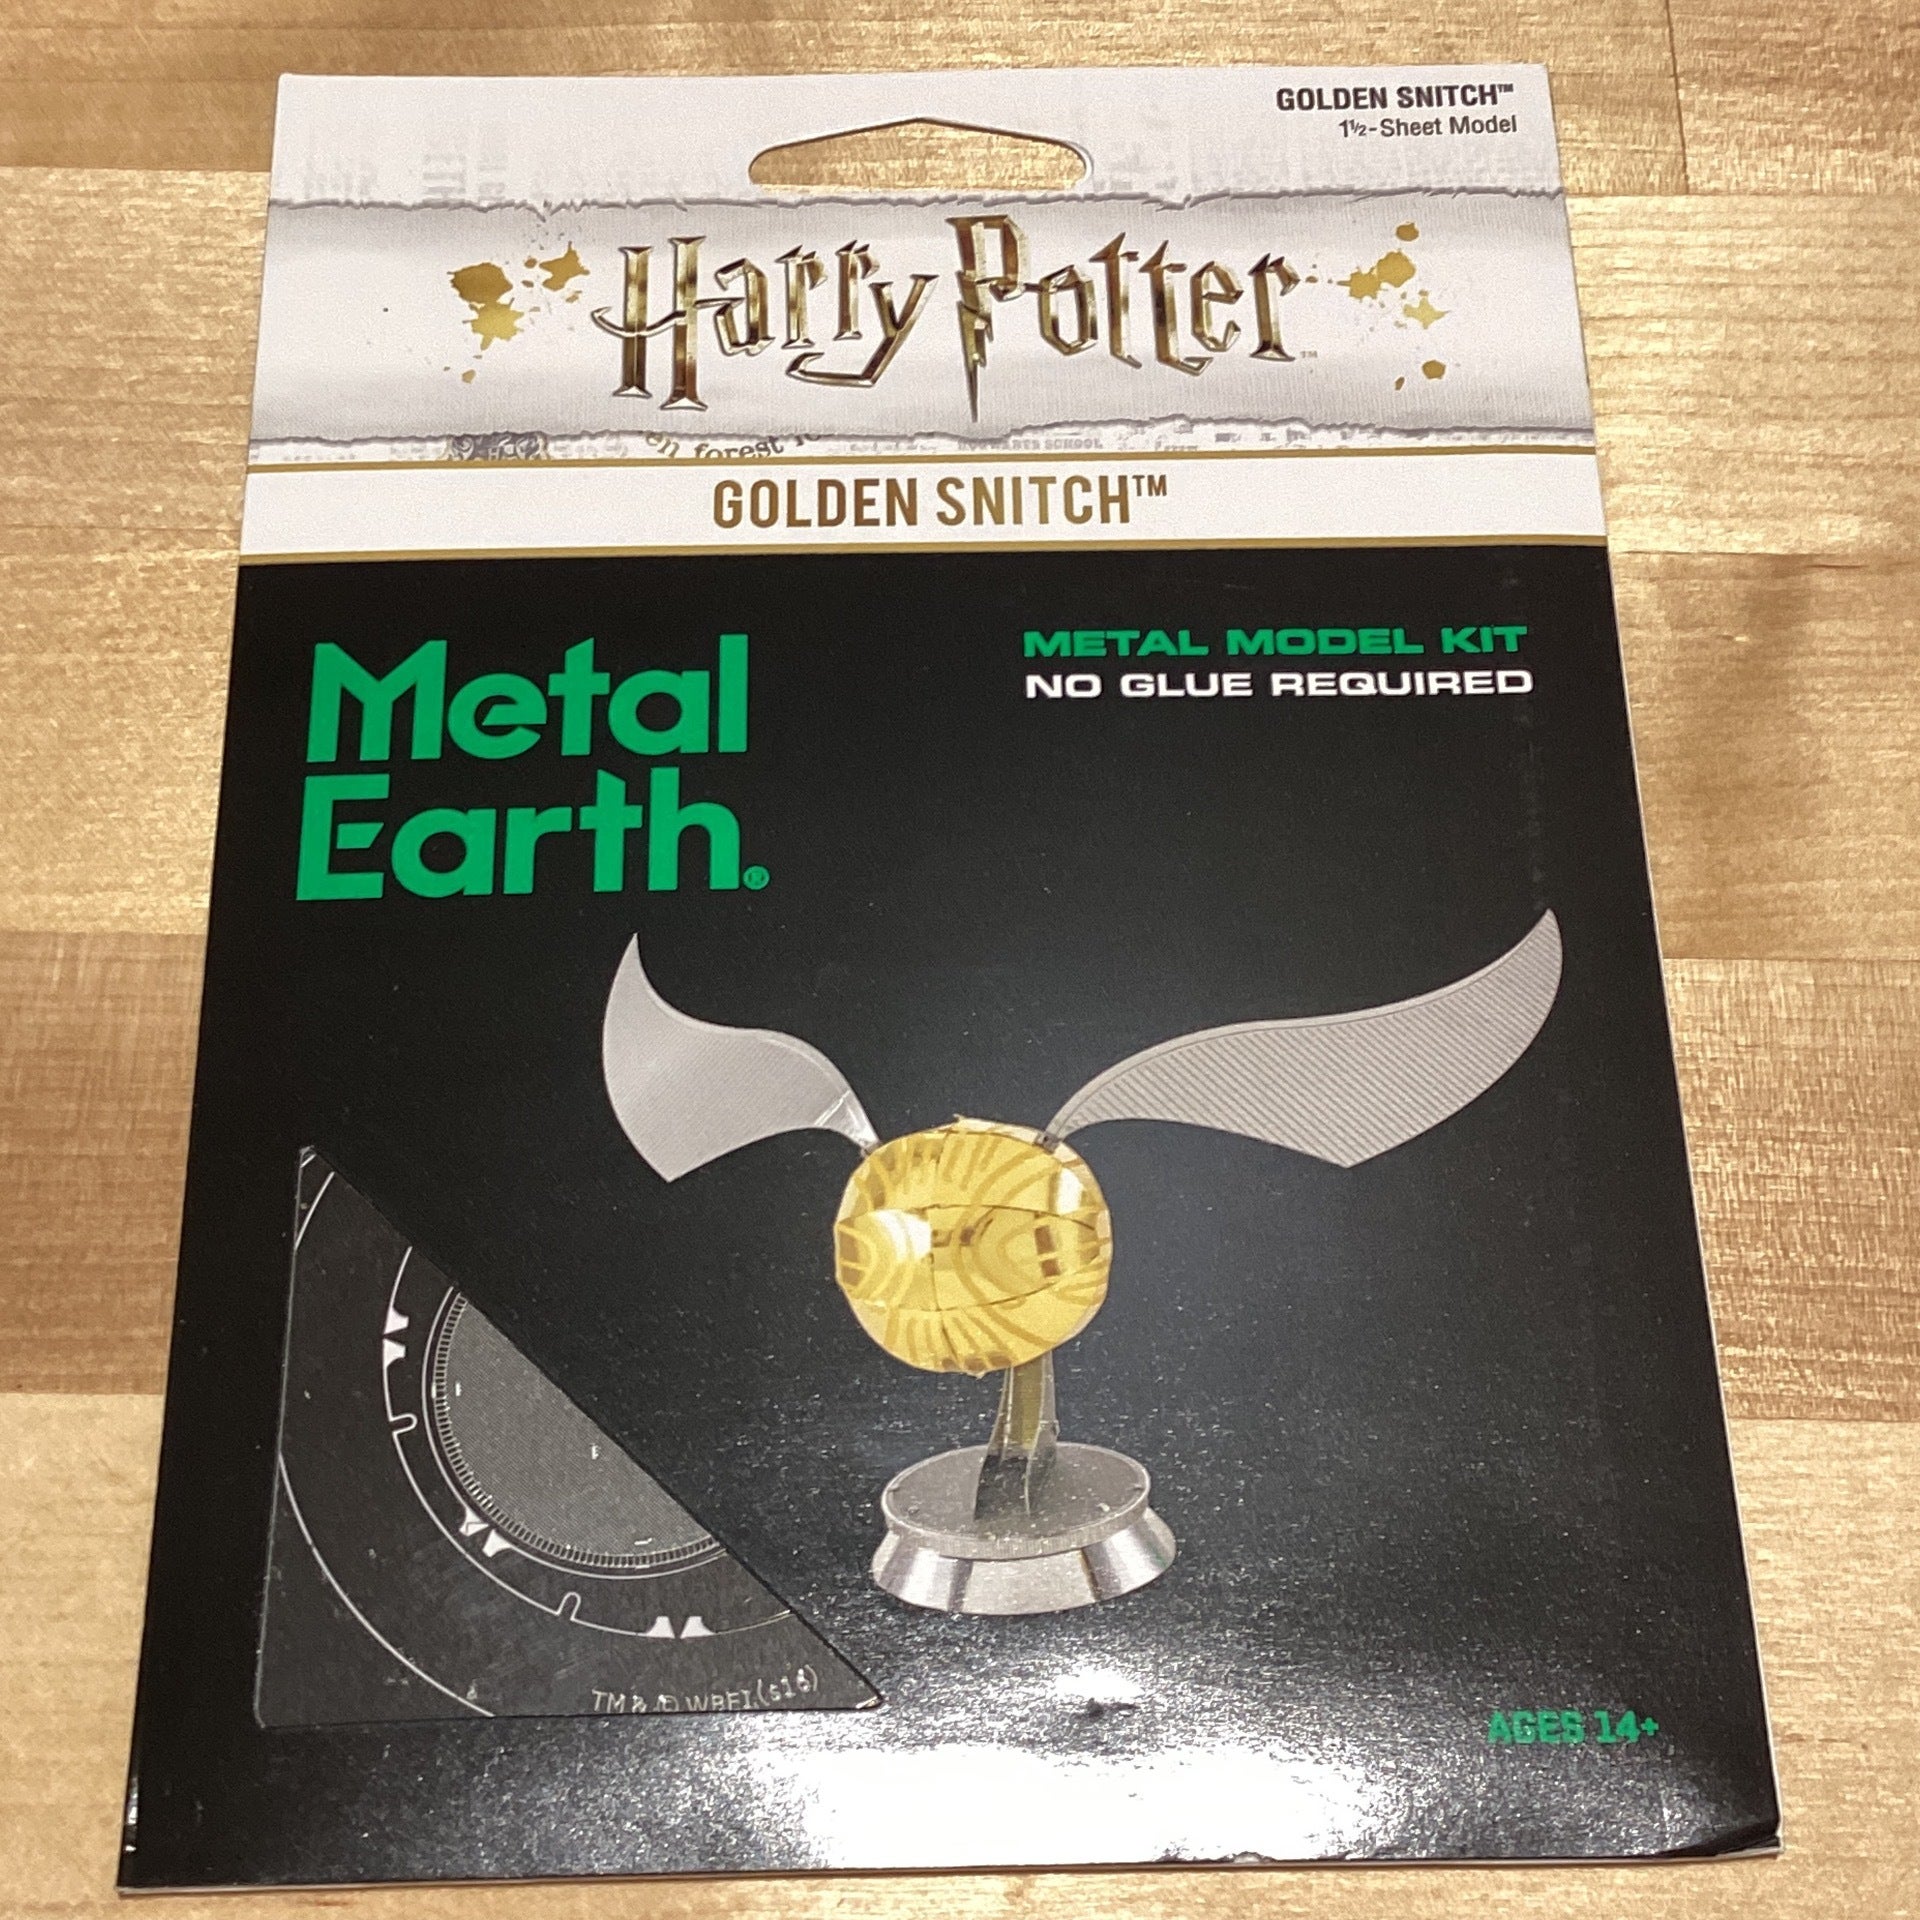 Metal Earth Harry Potter Golden Snitch Hendersonville Toy Company